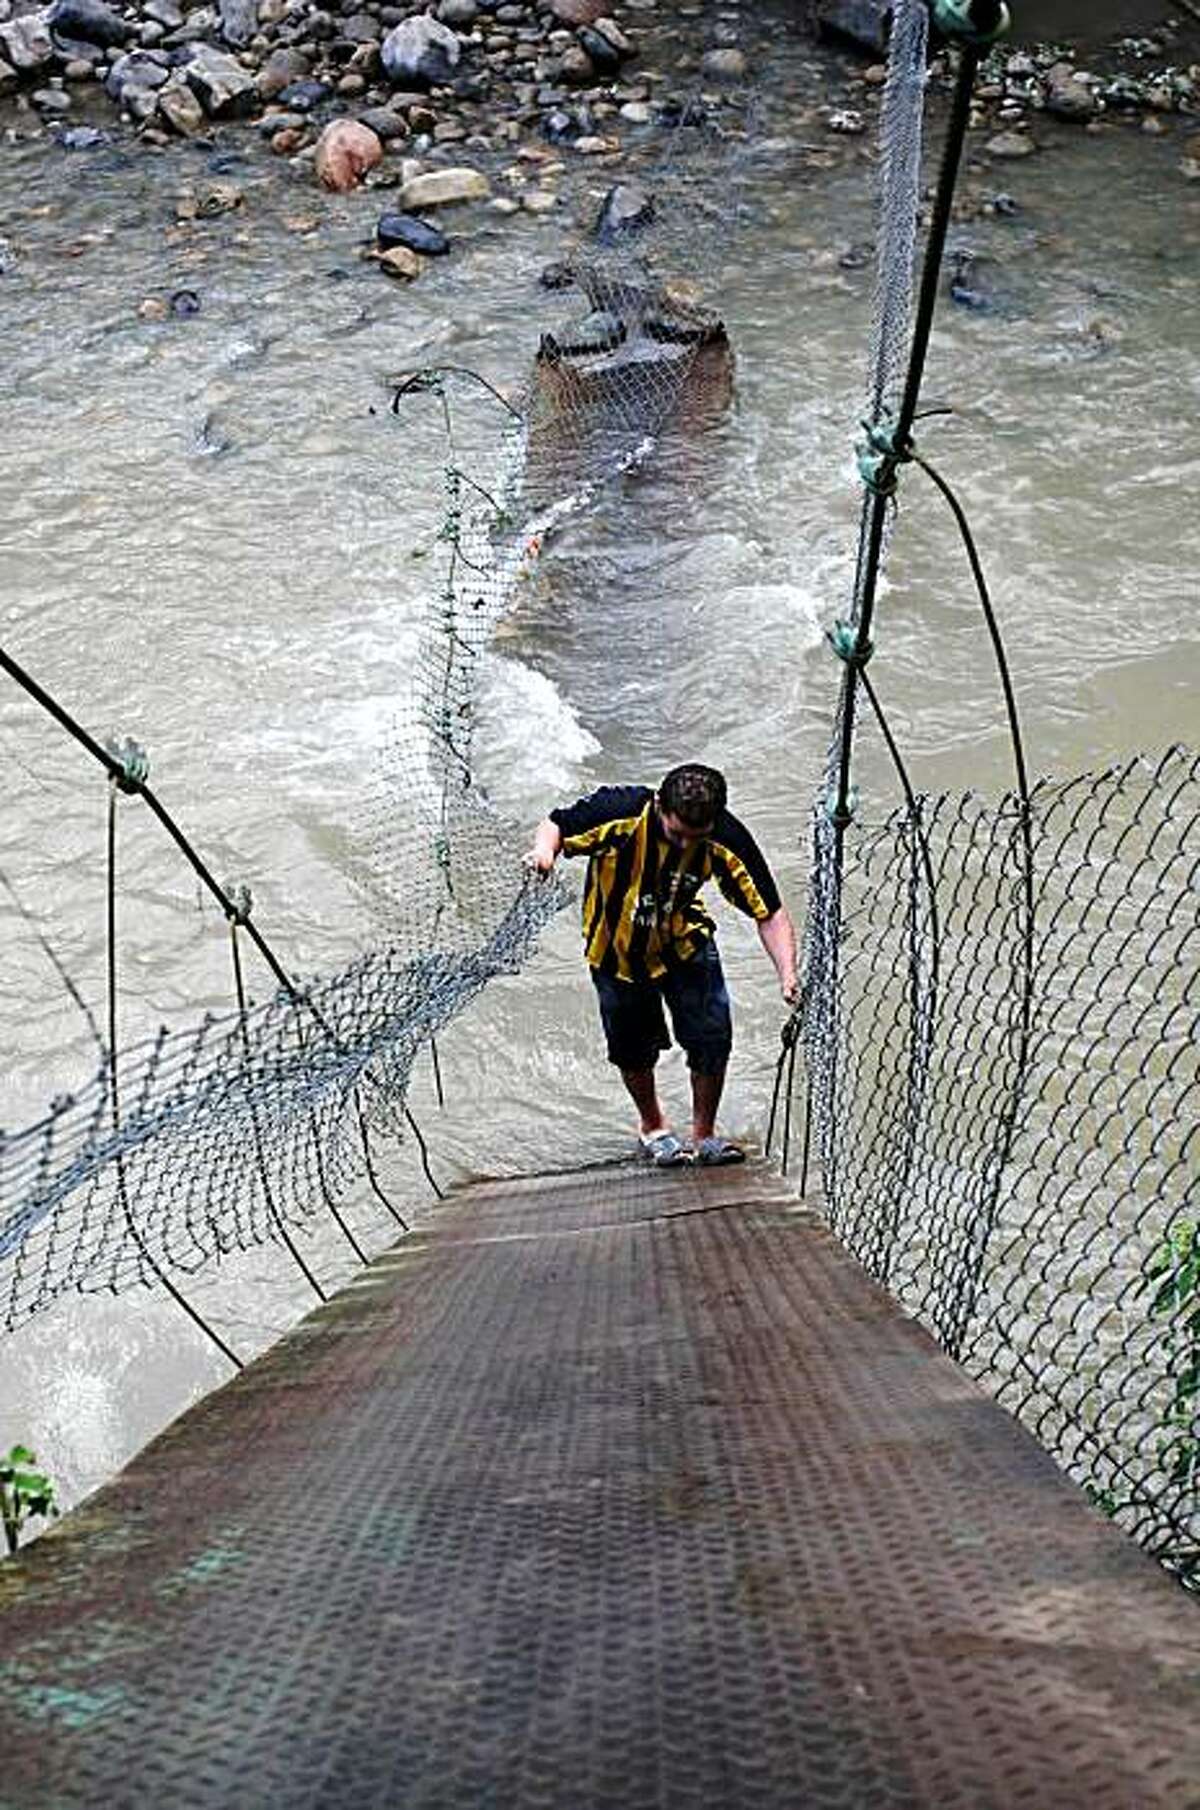 A man climbs a fallen footbridge that links Colombia and Venezuela over the Tachira River in Ragonvalia in northeastern Colombia, Friday, Nov. 20, 2009. Venezuelan Vice President Ramon Carrizales said Venezuelan soldiers destroyed two make shift bridges along its border with Colombia on Nov. 19 because they were being used by drug traffickers.